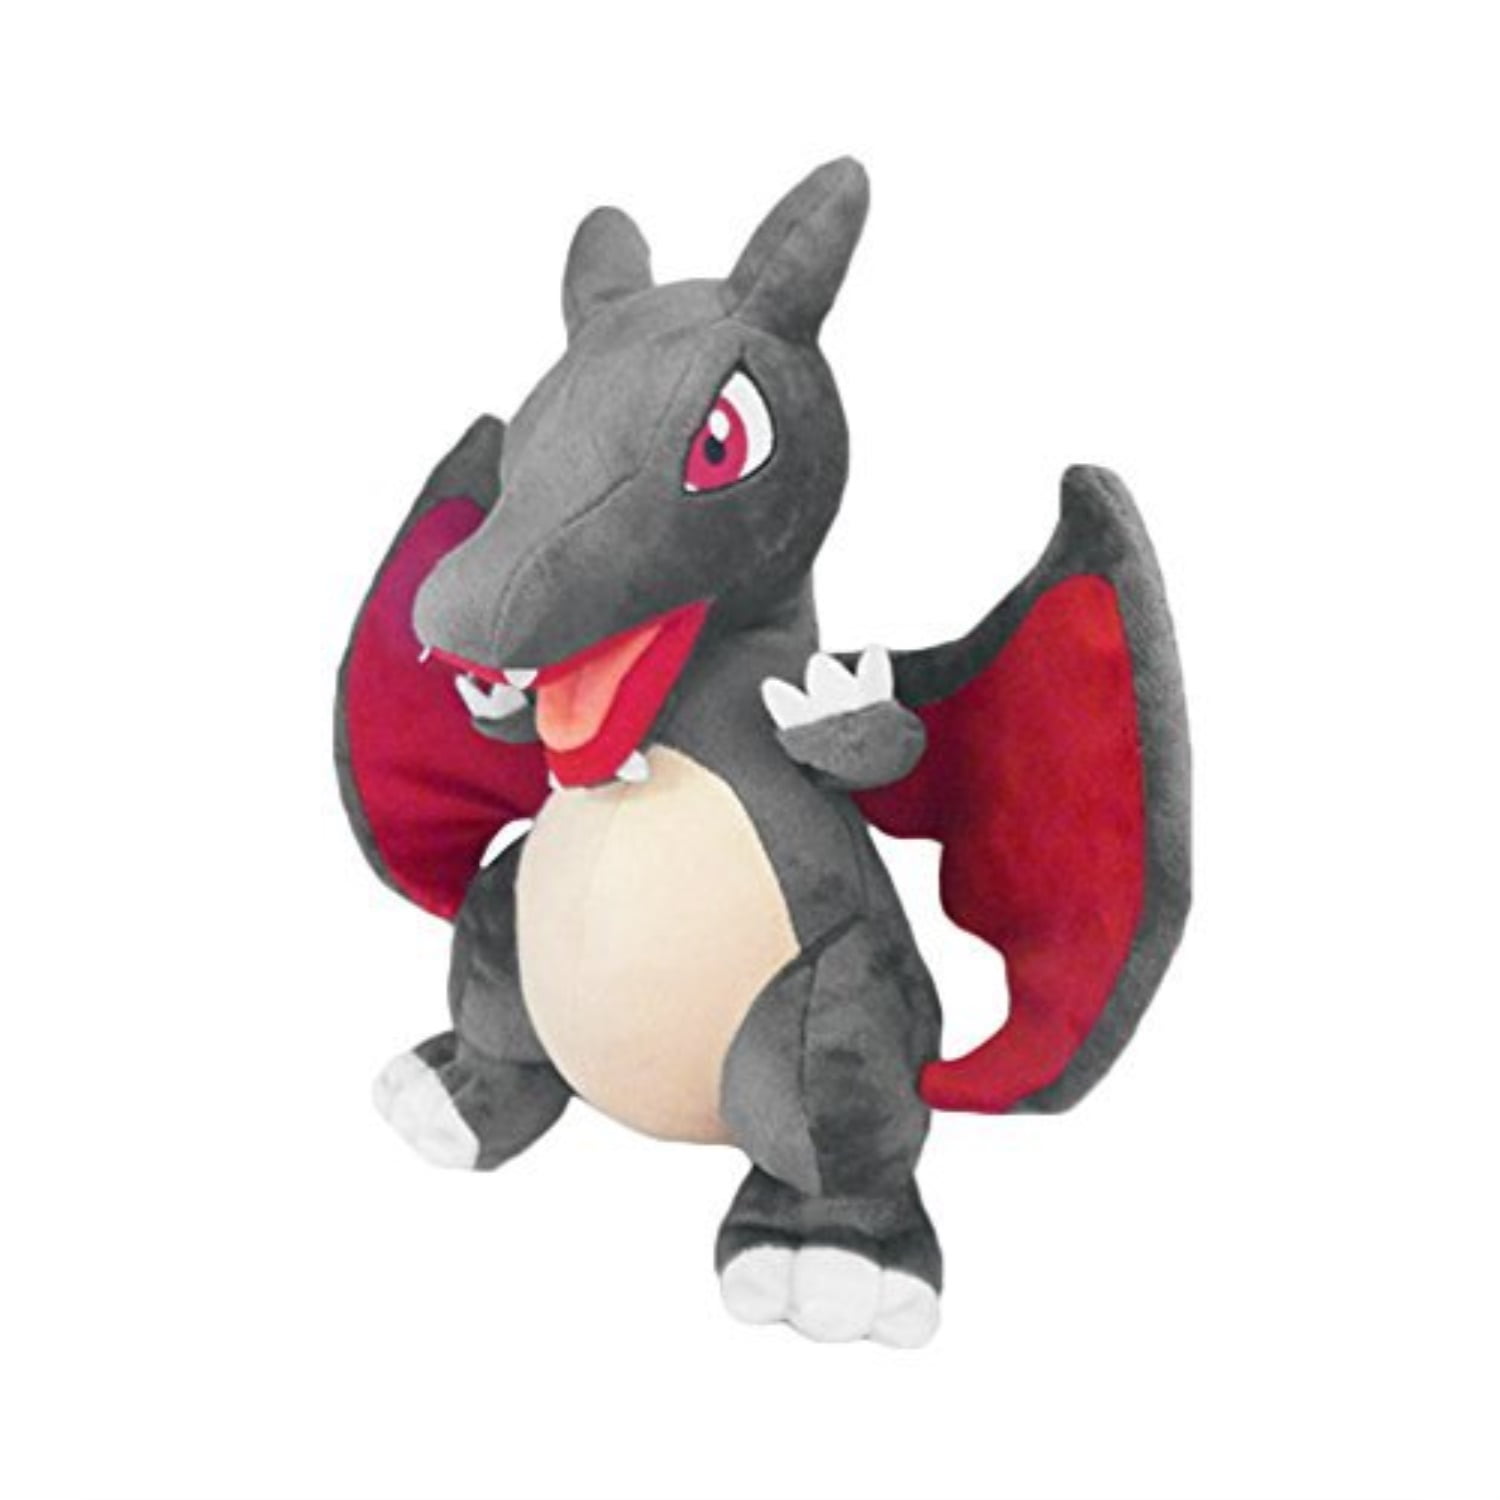 Shiny Pokemon Plush Cheaper Than Retail Price Buy Clothing Accessories And Lifestyle Products For Women Men